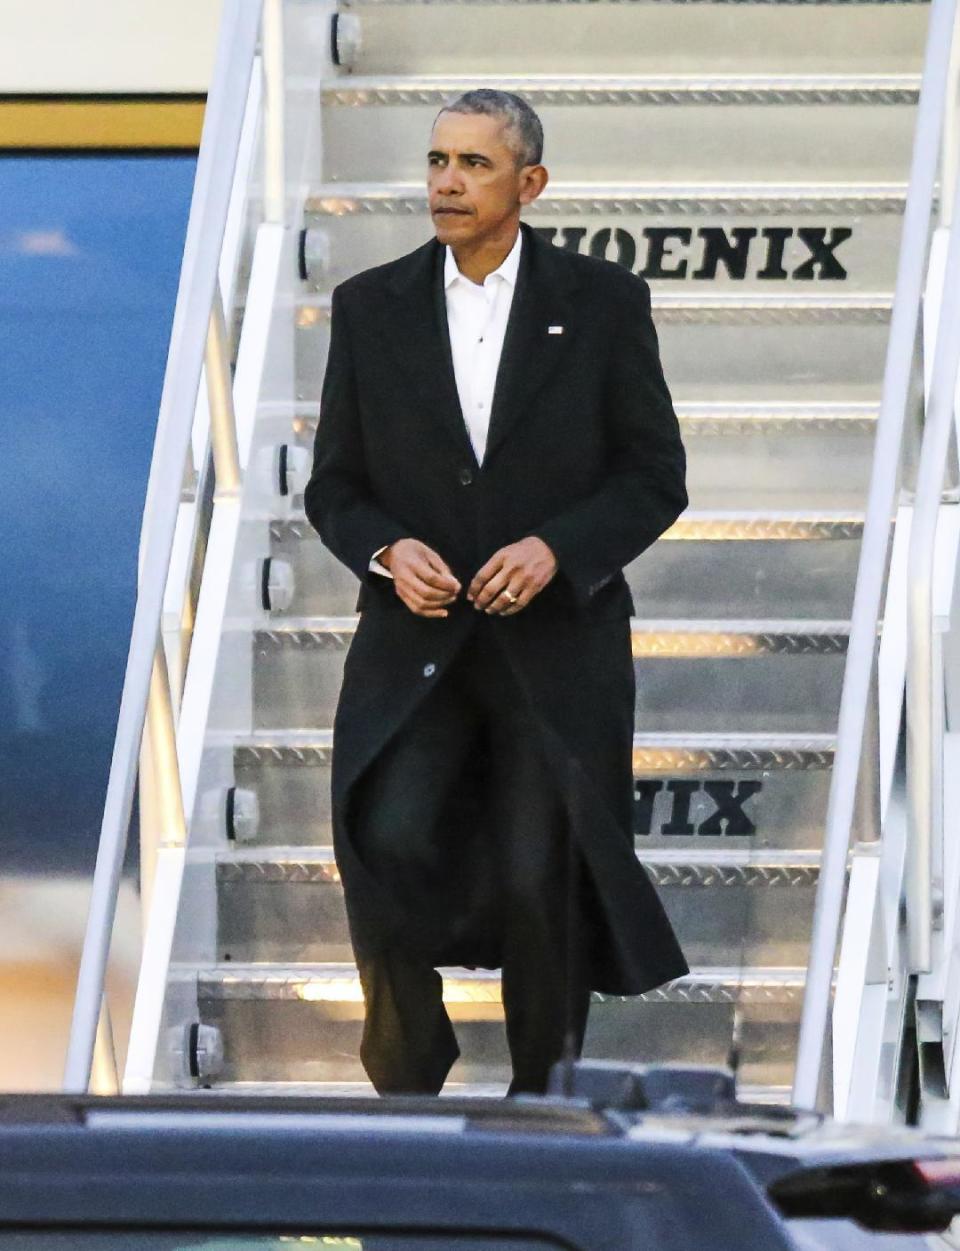 President Barack Obama arrives at Jacksonville International Airport on Saturday, Jan. 7, 2017, in Jacksonville, Fla. Obama is going to a staff member's wedding. (AP Photo/Gary McCullough)